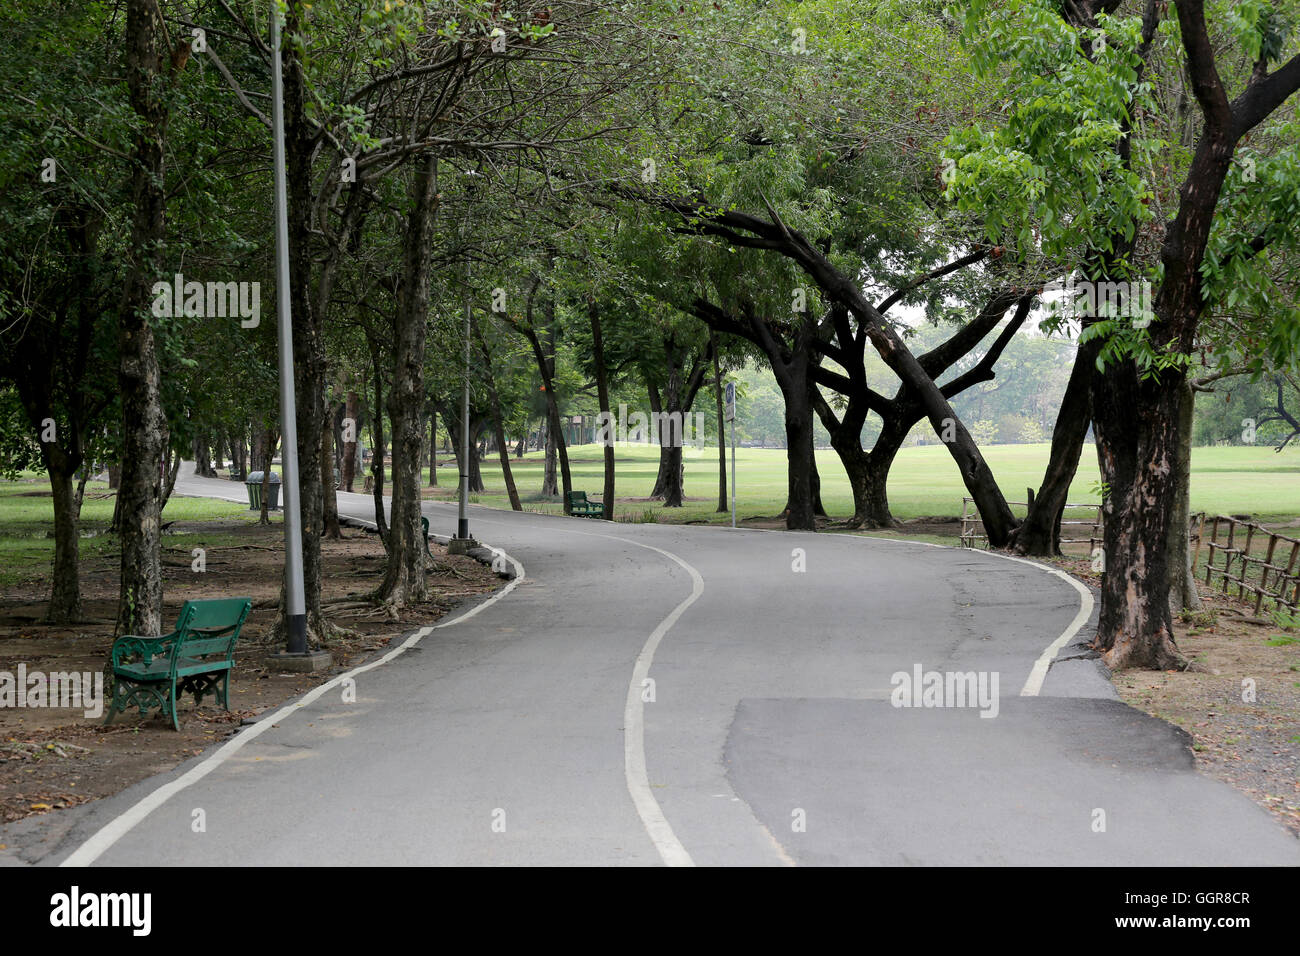 Road in the public park in day time. Stock Photo